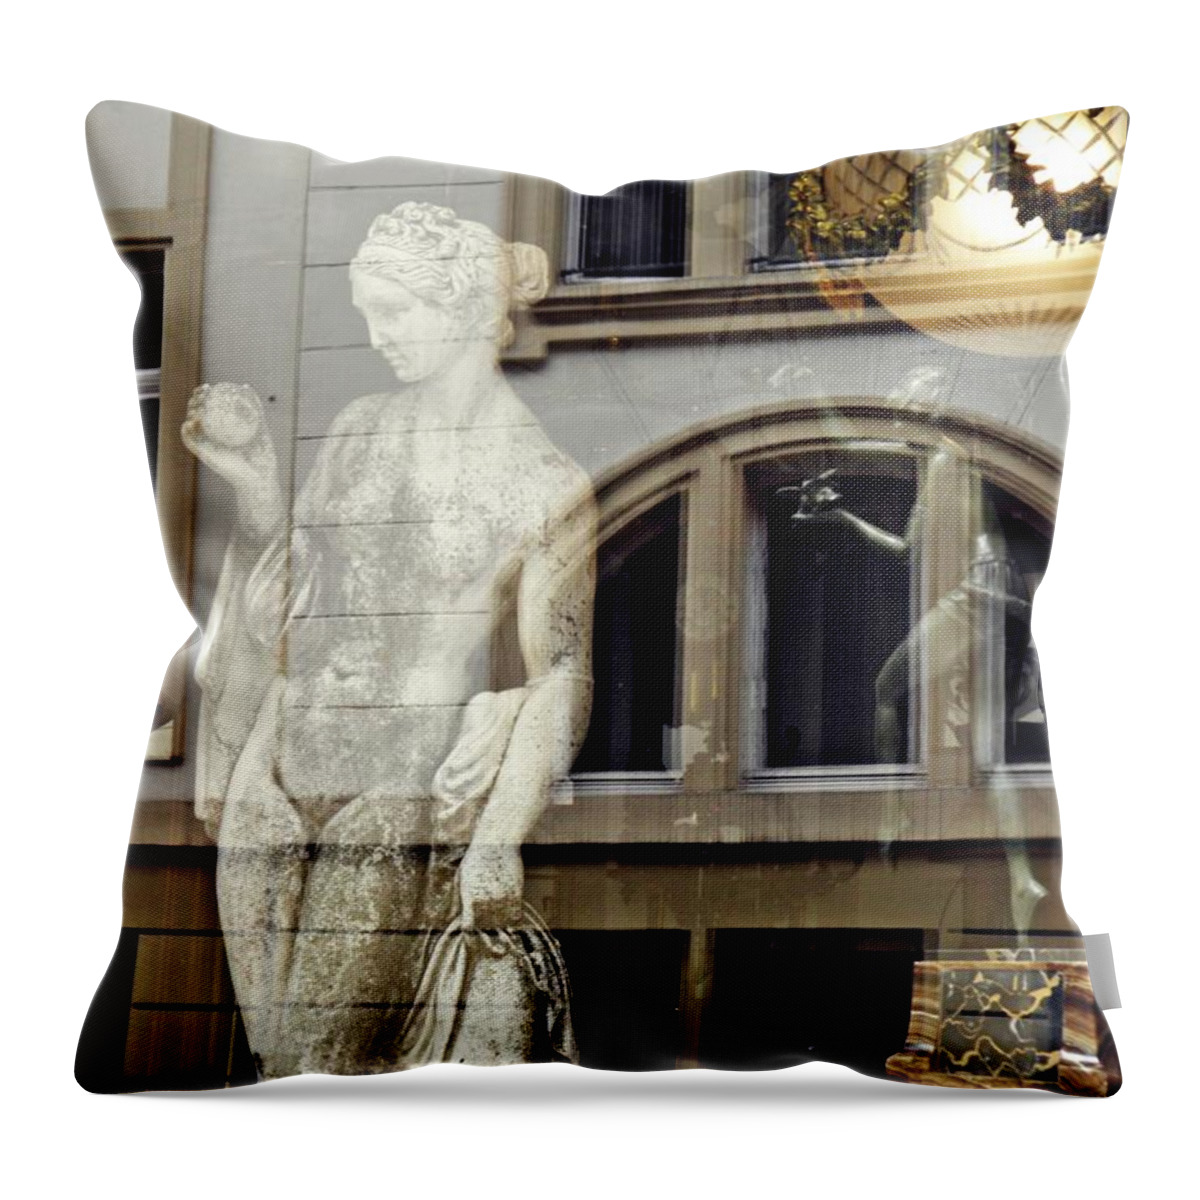 Statue Throw Pillow featuring the photograph Antiquities in Wiesbaden by Sarah Loft